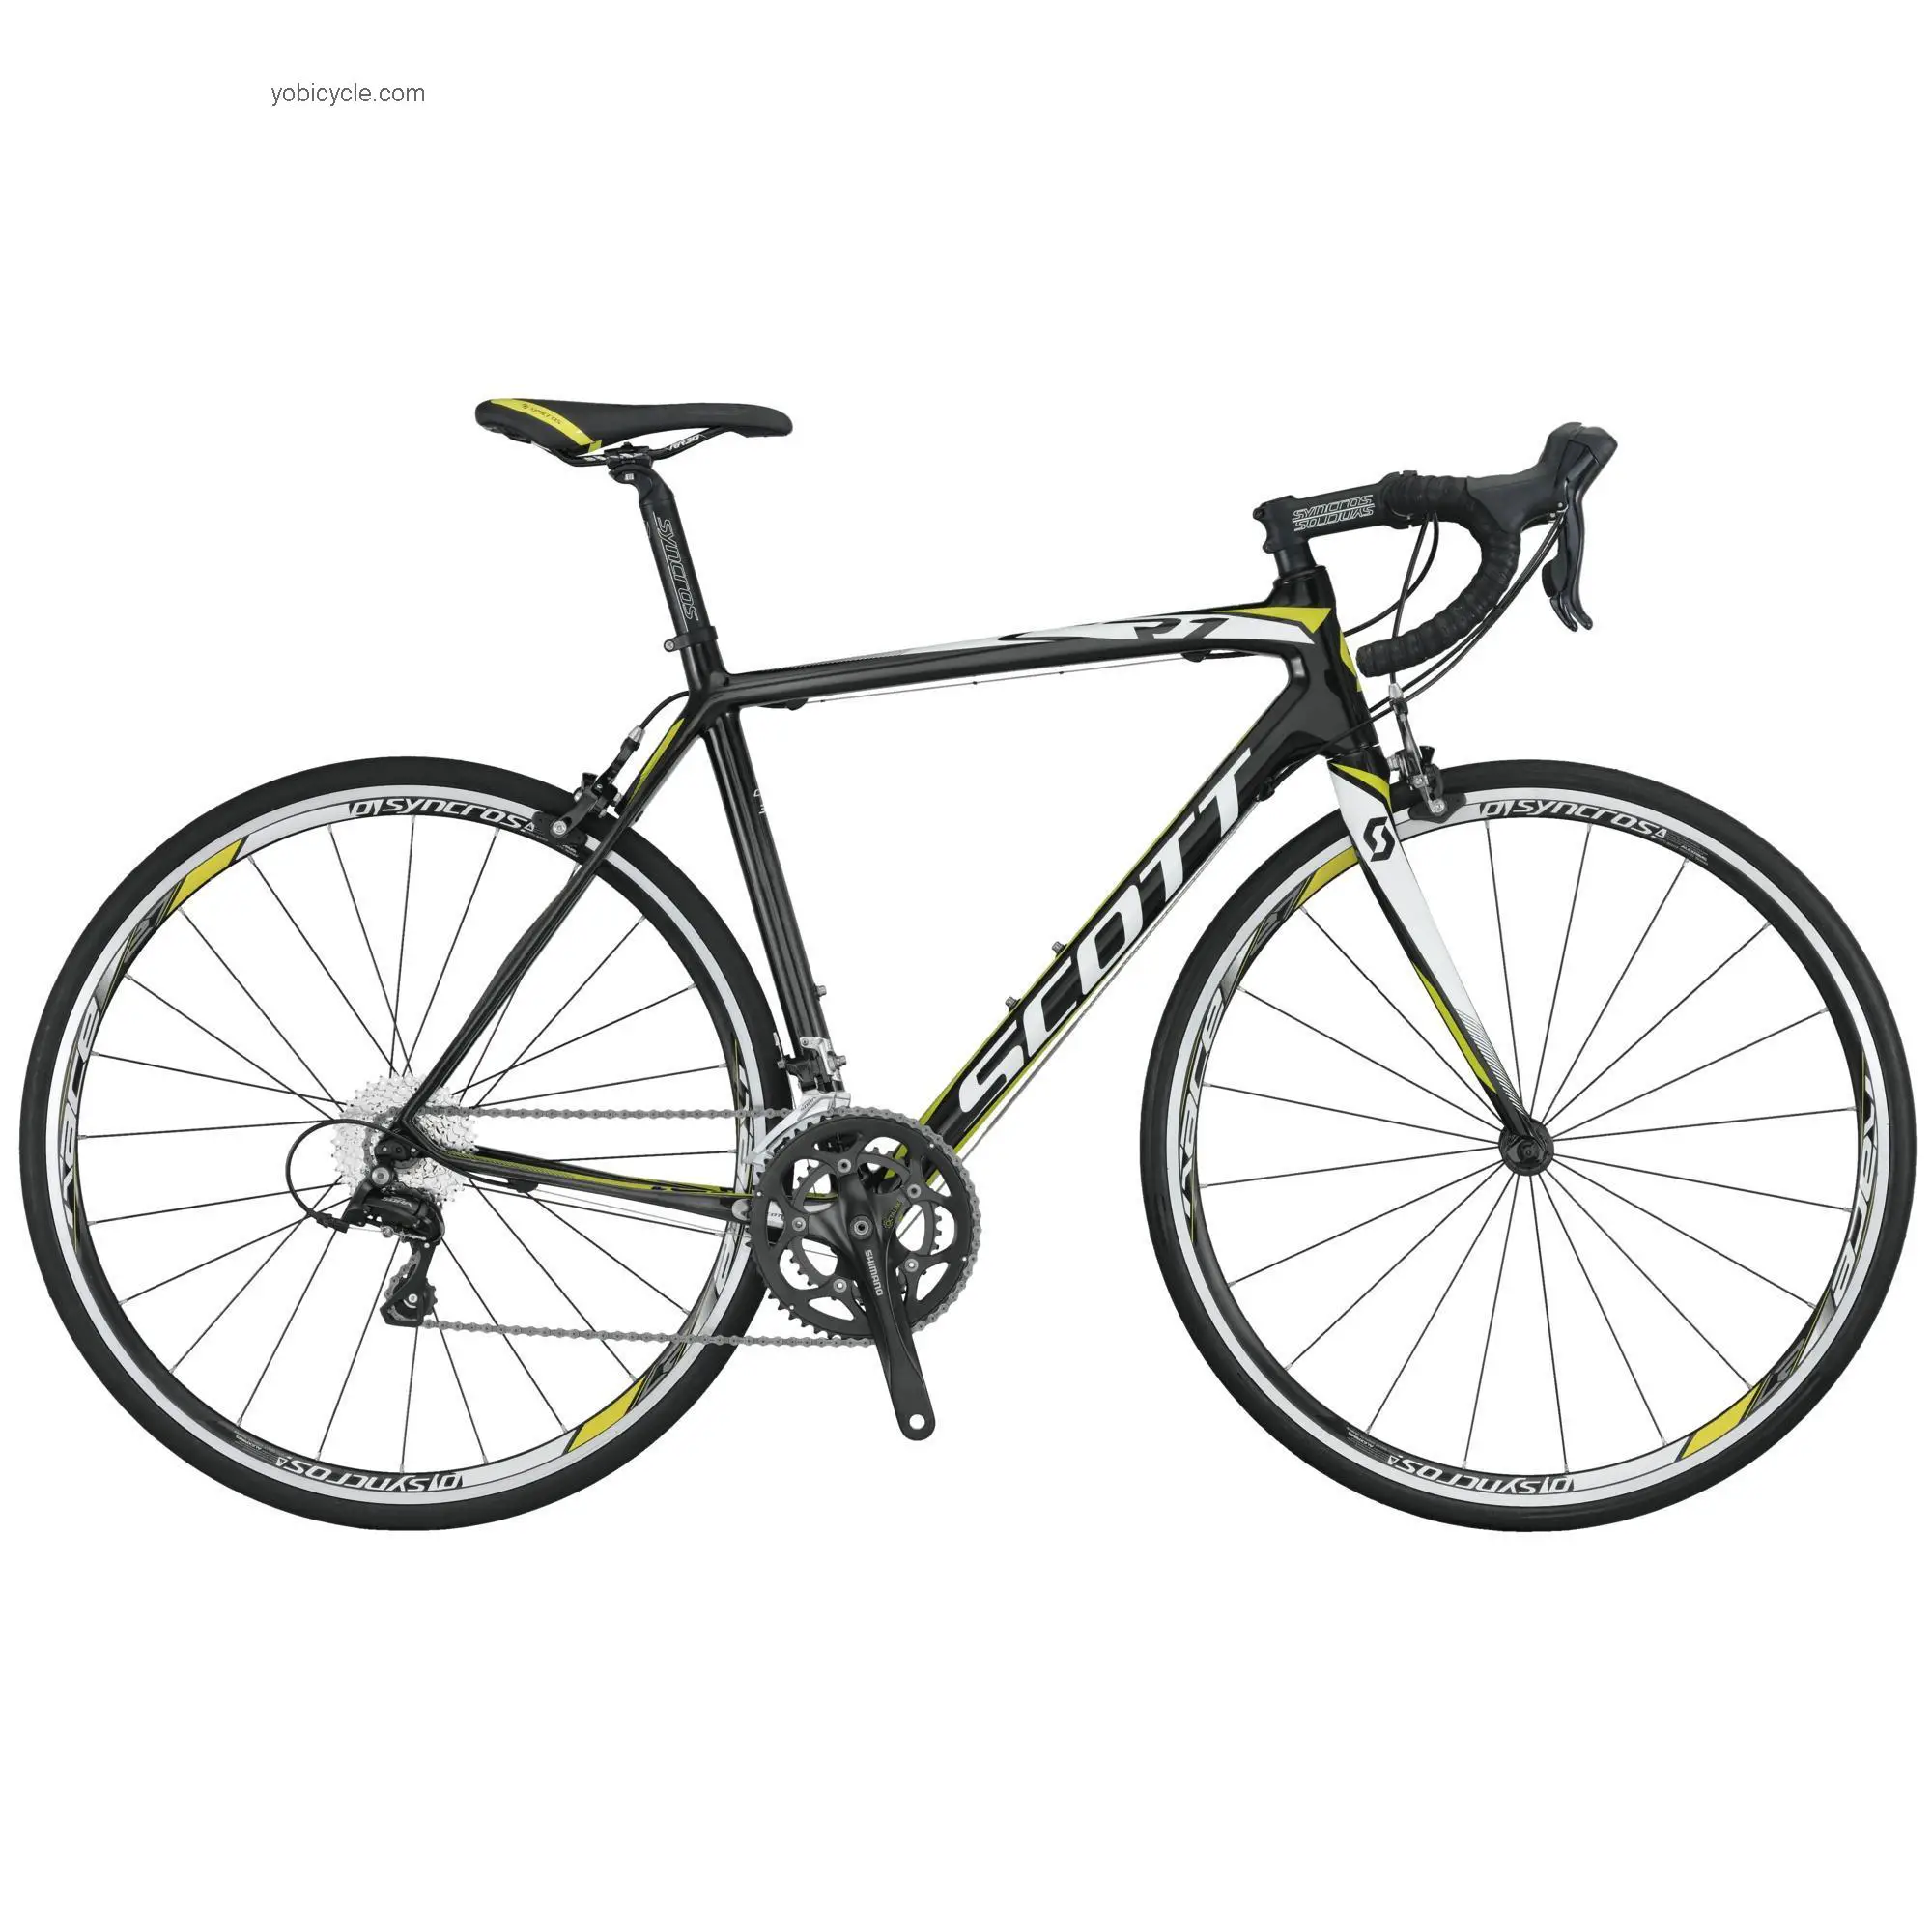 Scott  CR1 30 Technical data and specifications